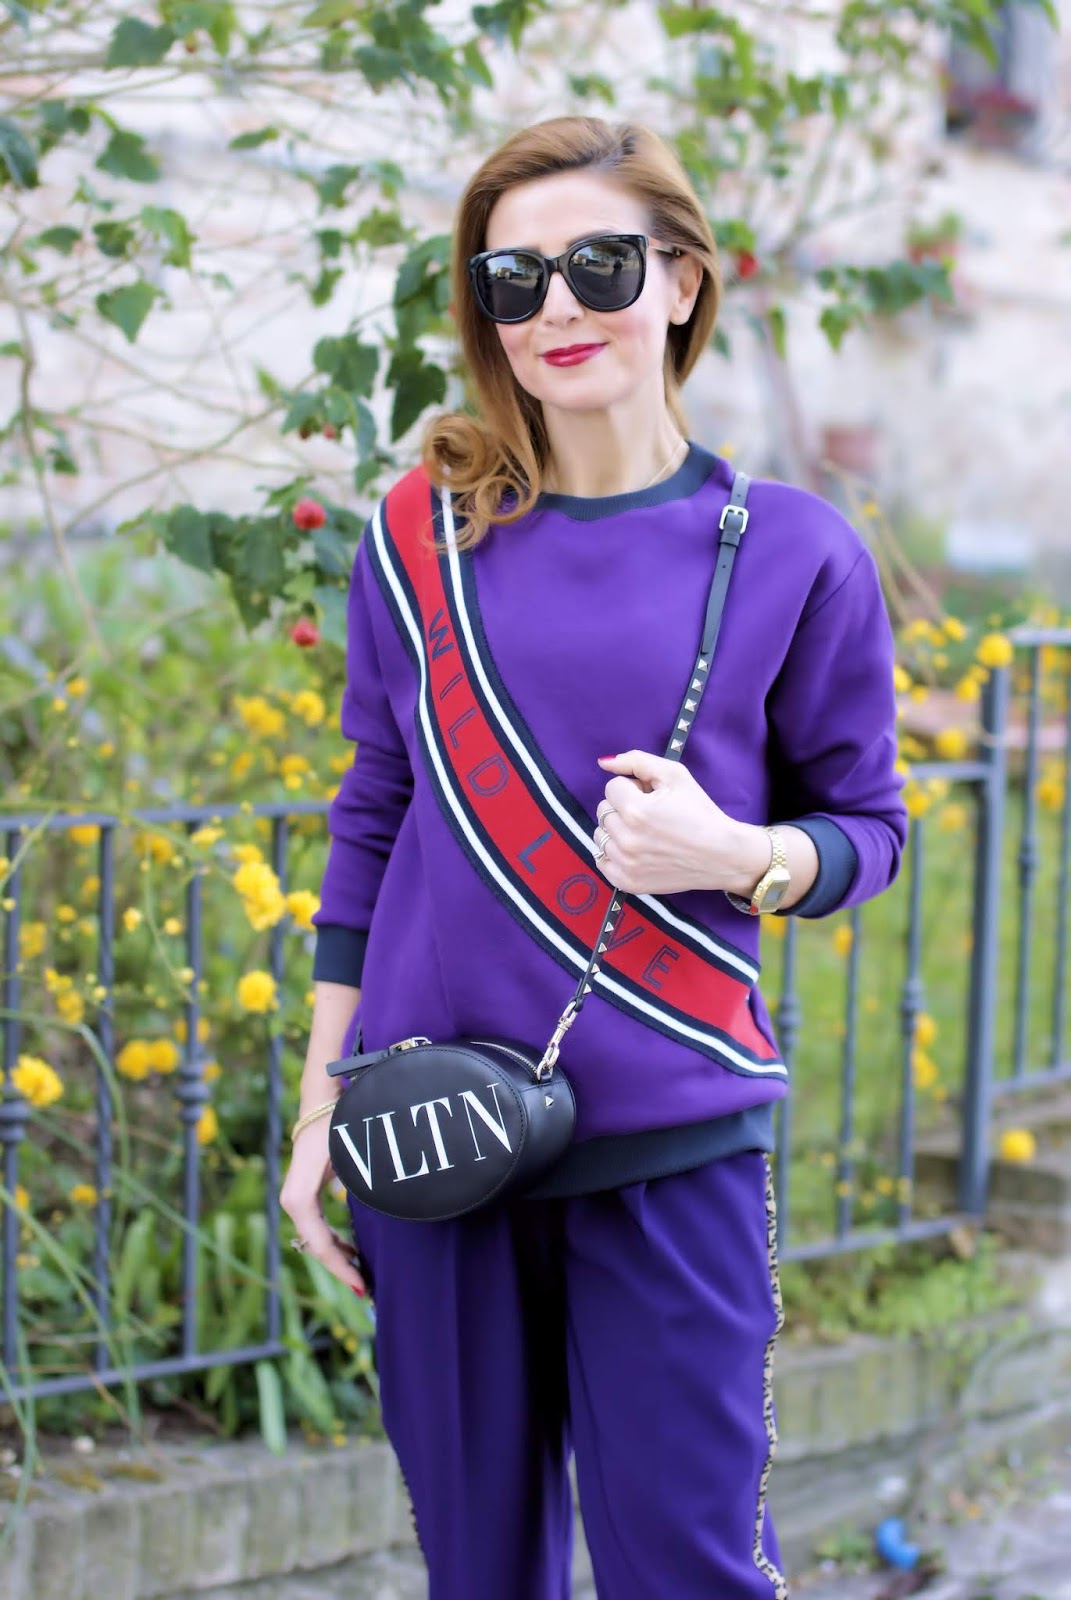 VLTN: the new Valentino logo in a sporty chic outfit on Fashion and Cookies fashion blog, fashion blogger style